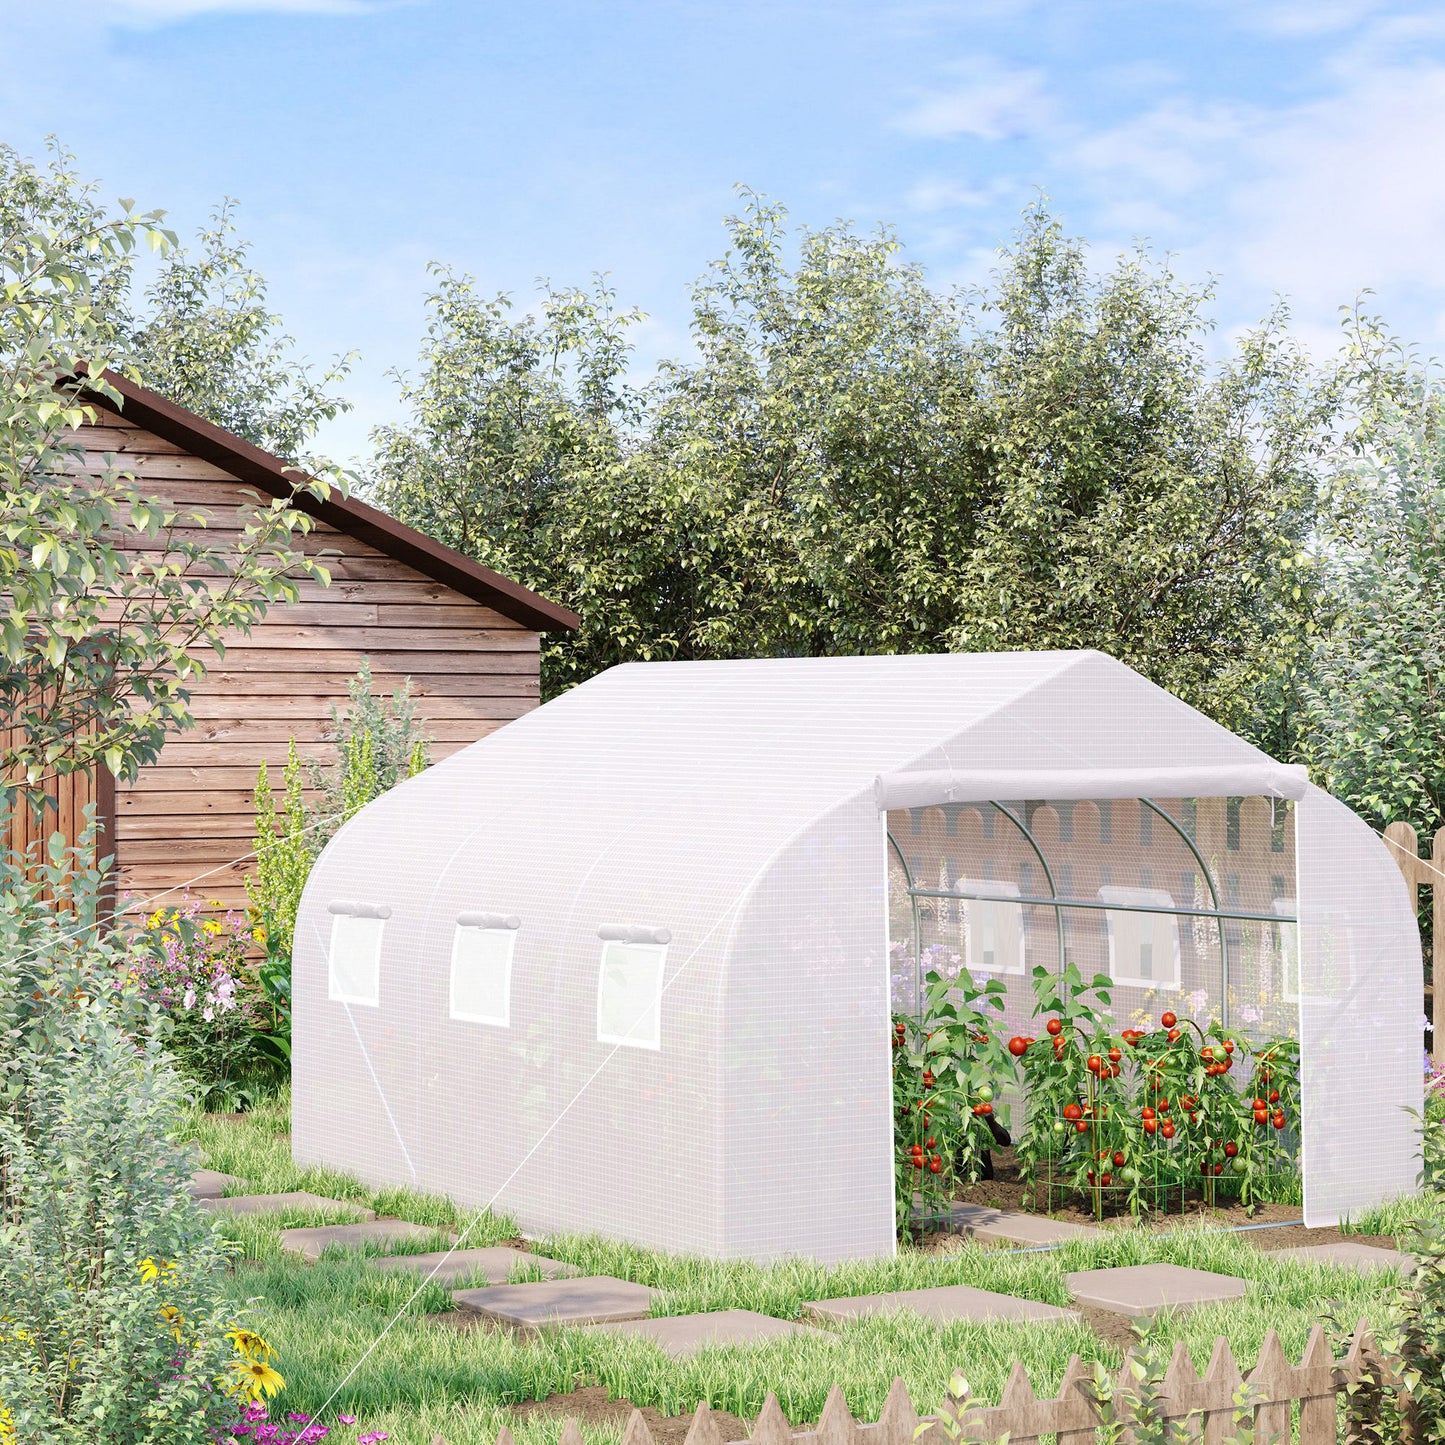 Outsunny 4.5 x 3 x 2m Walk-In Greenhouse Polytunnel Greenhouse Garden Hot House with Steel Frame, Roll Up Door and Windows, White